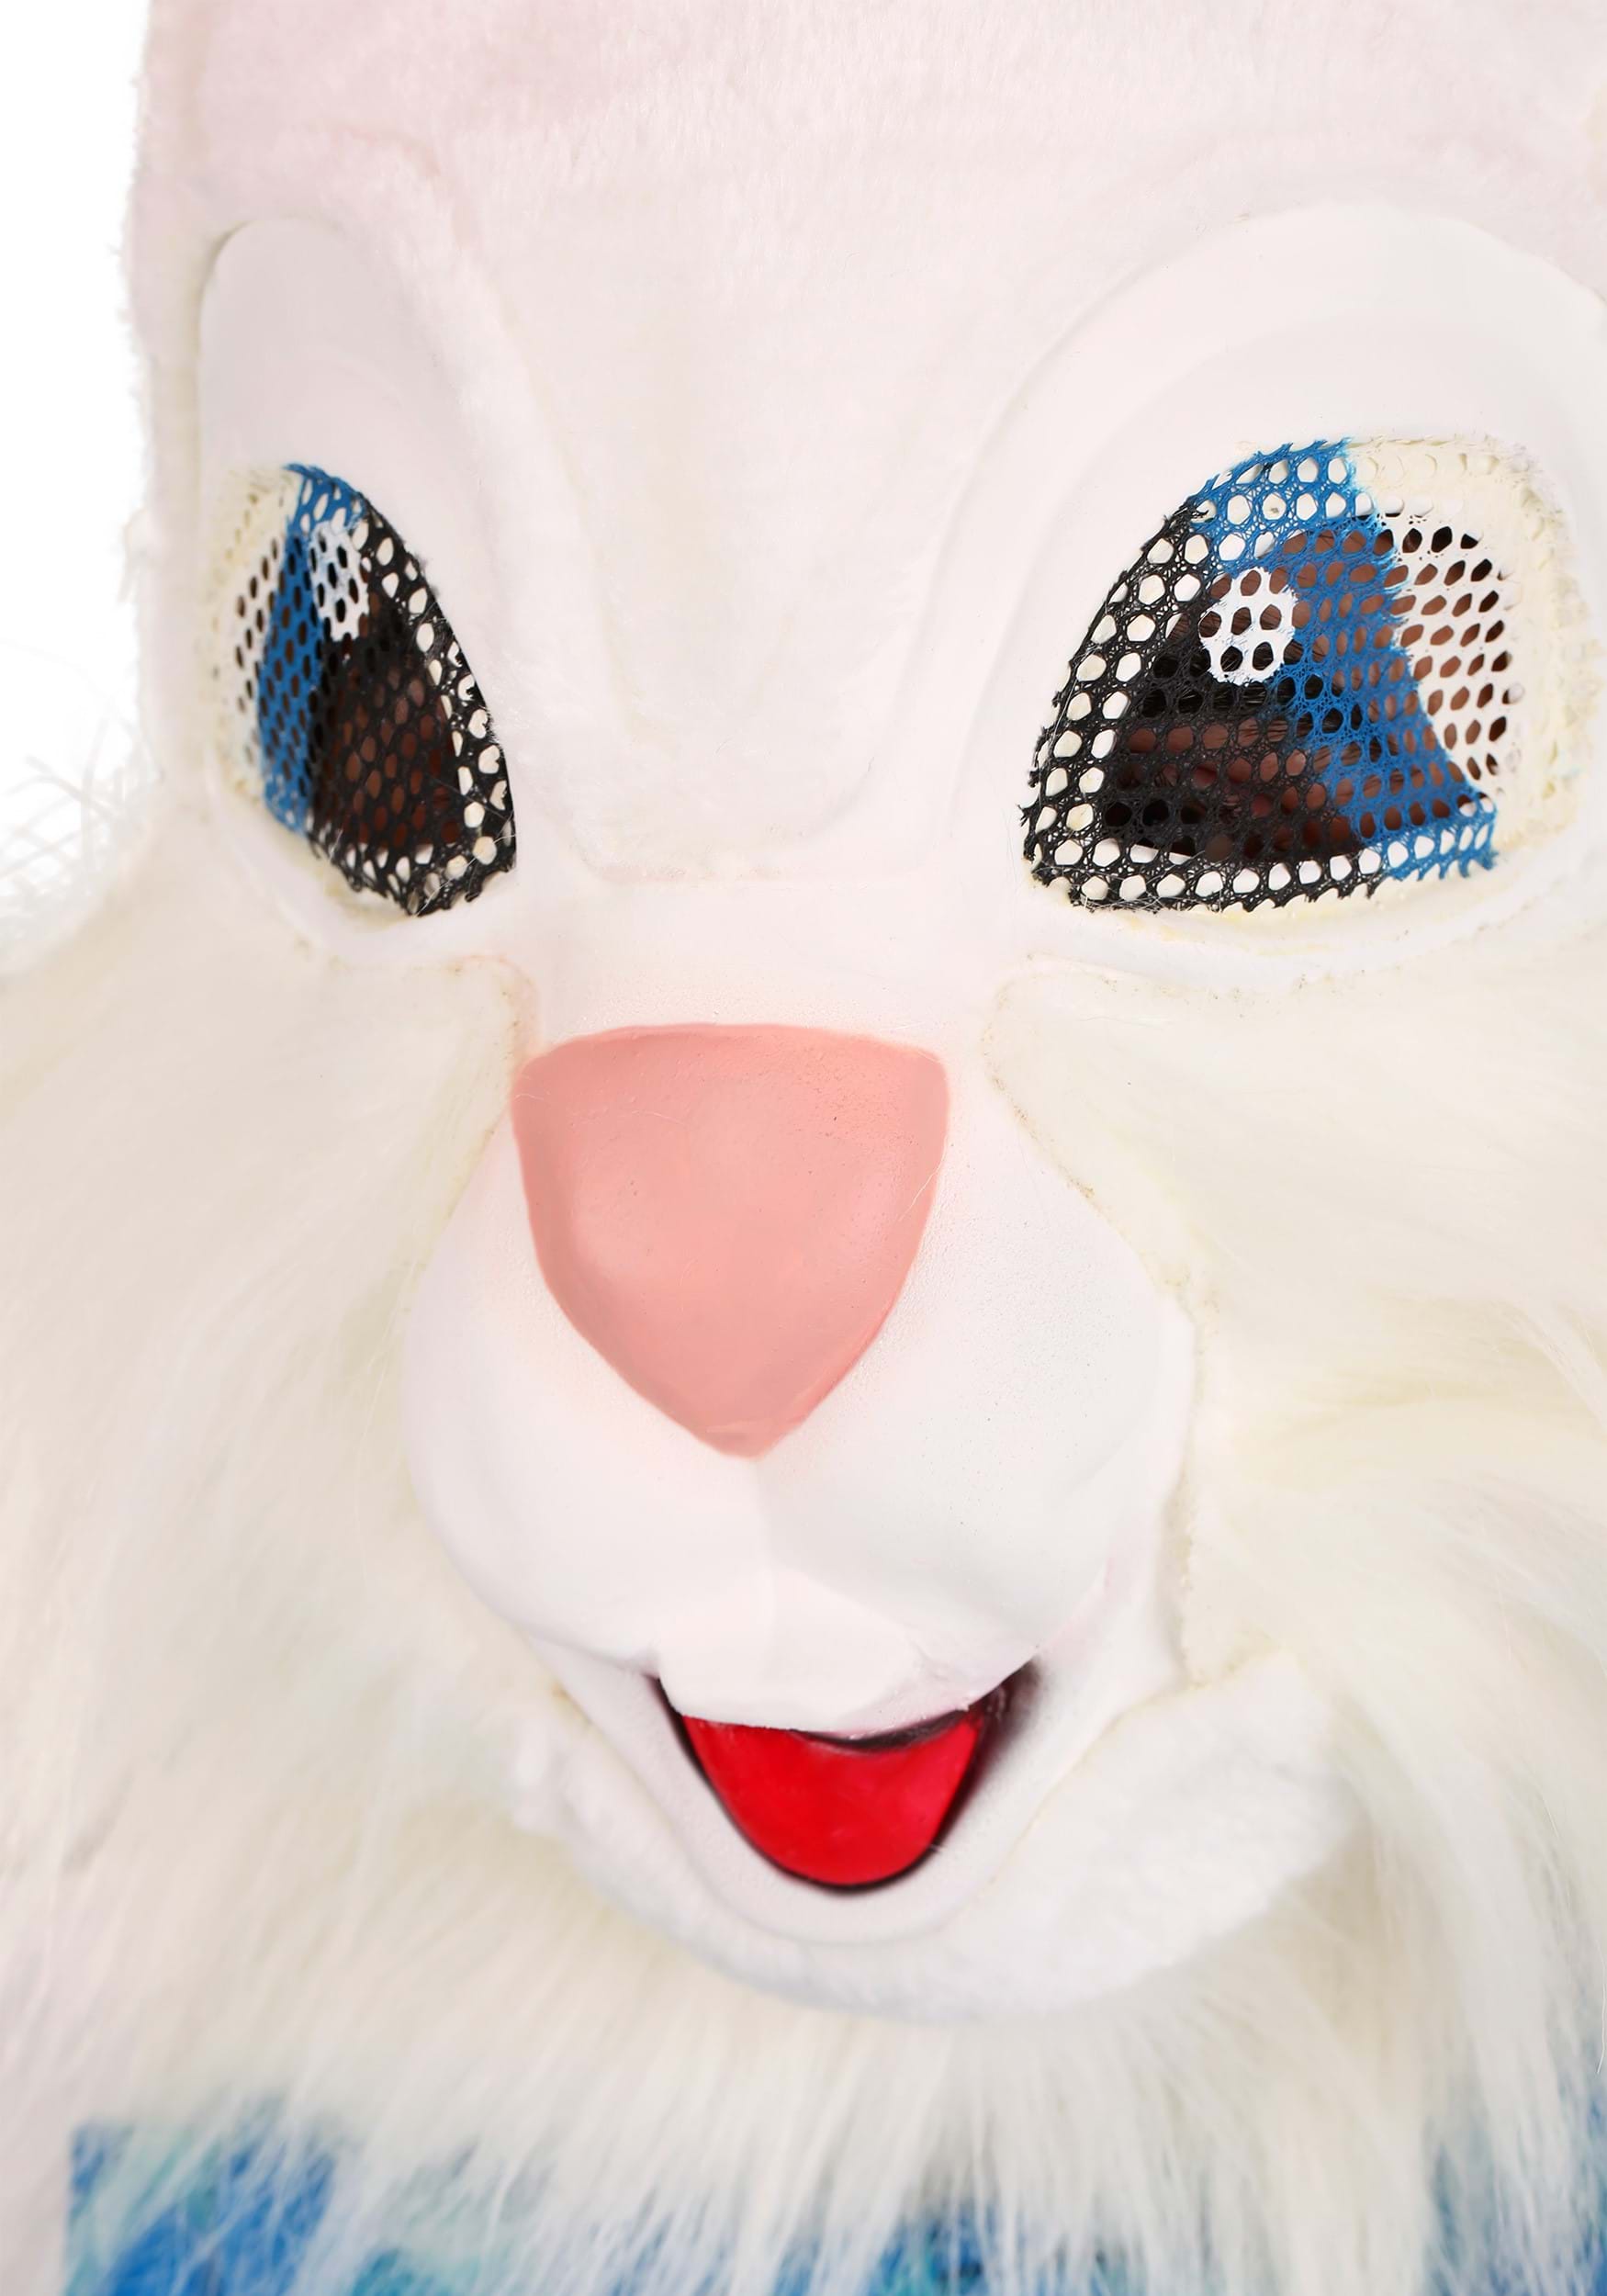 Easter Bunny Fancy Dress Costume For Adults